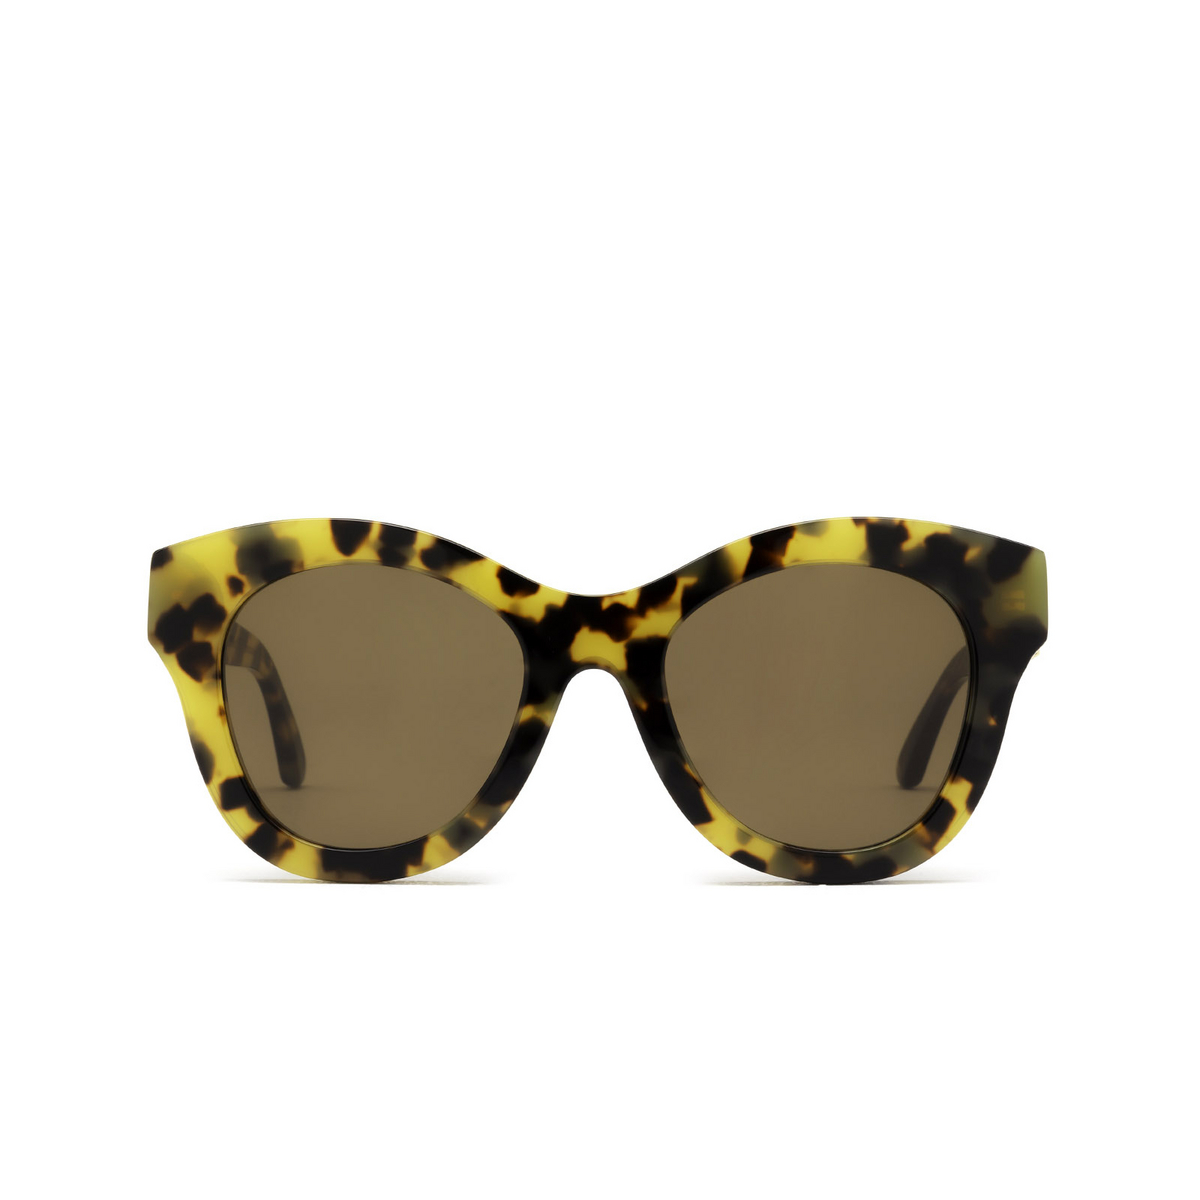 Huma® Butterfly Sunglasses: Cami color Maculate 19 - front view.